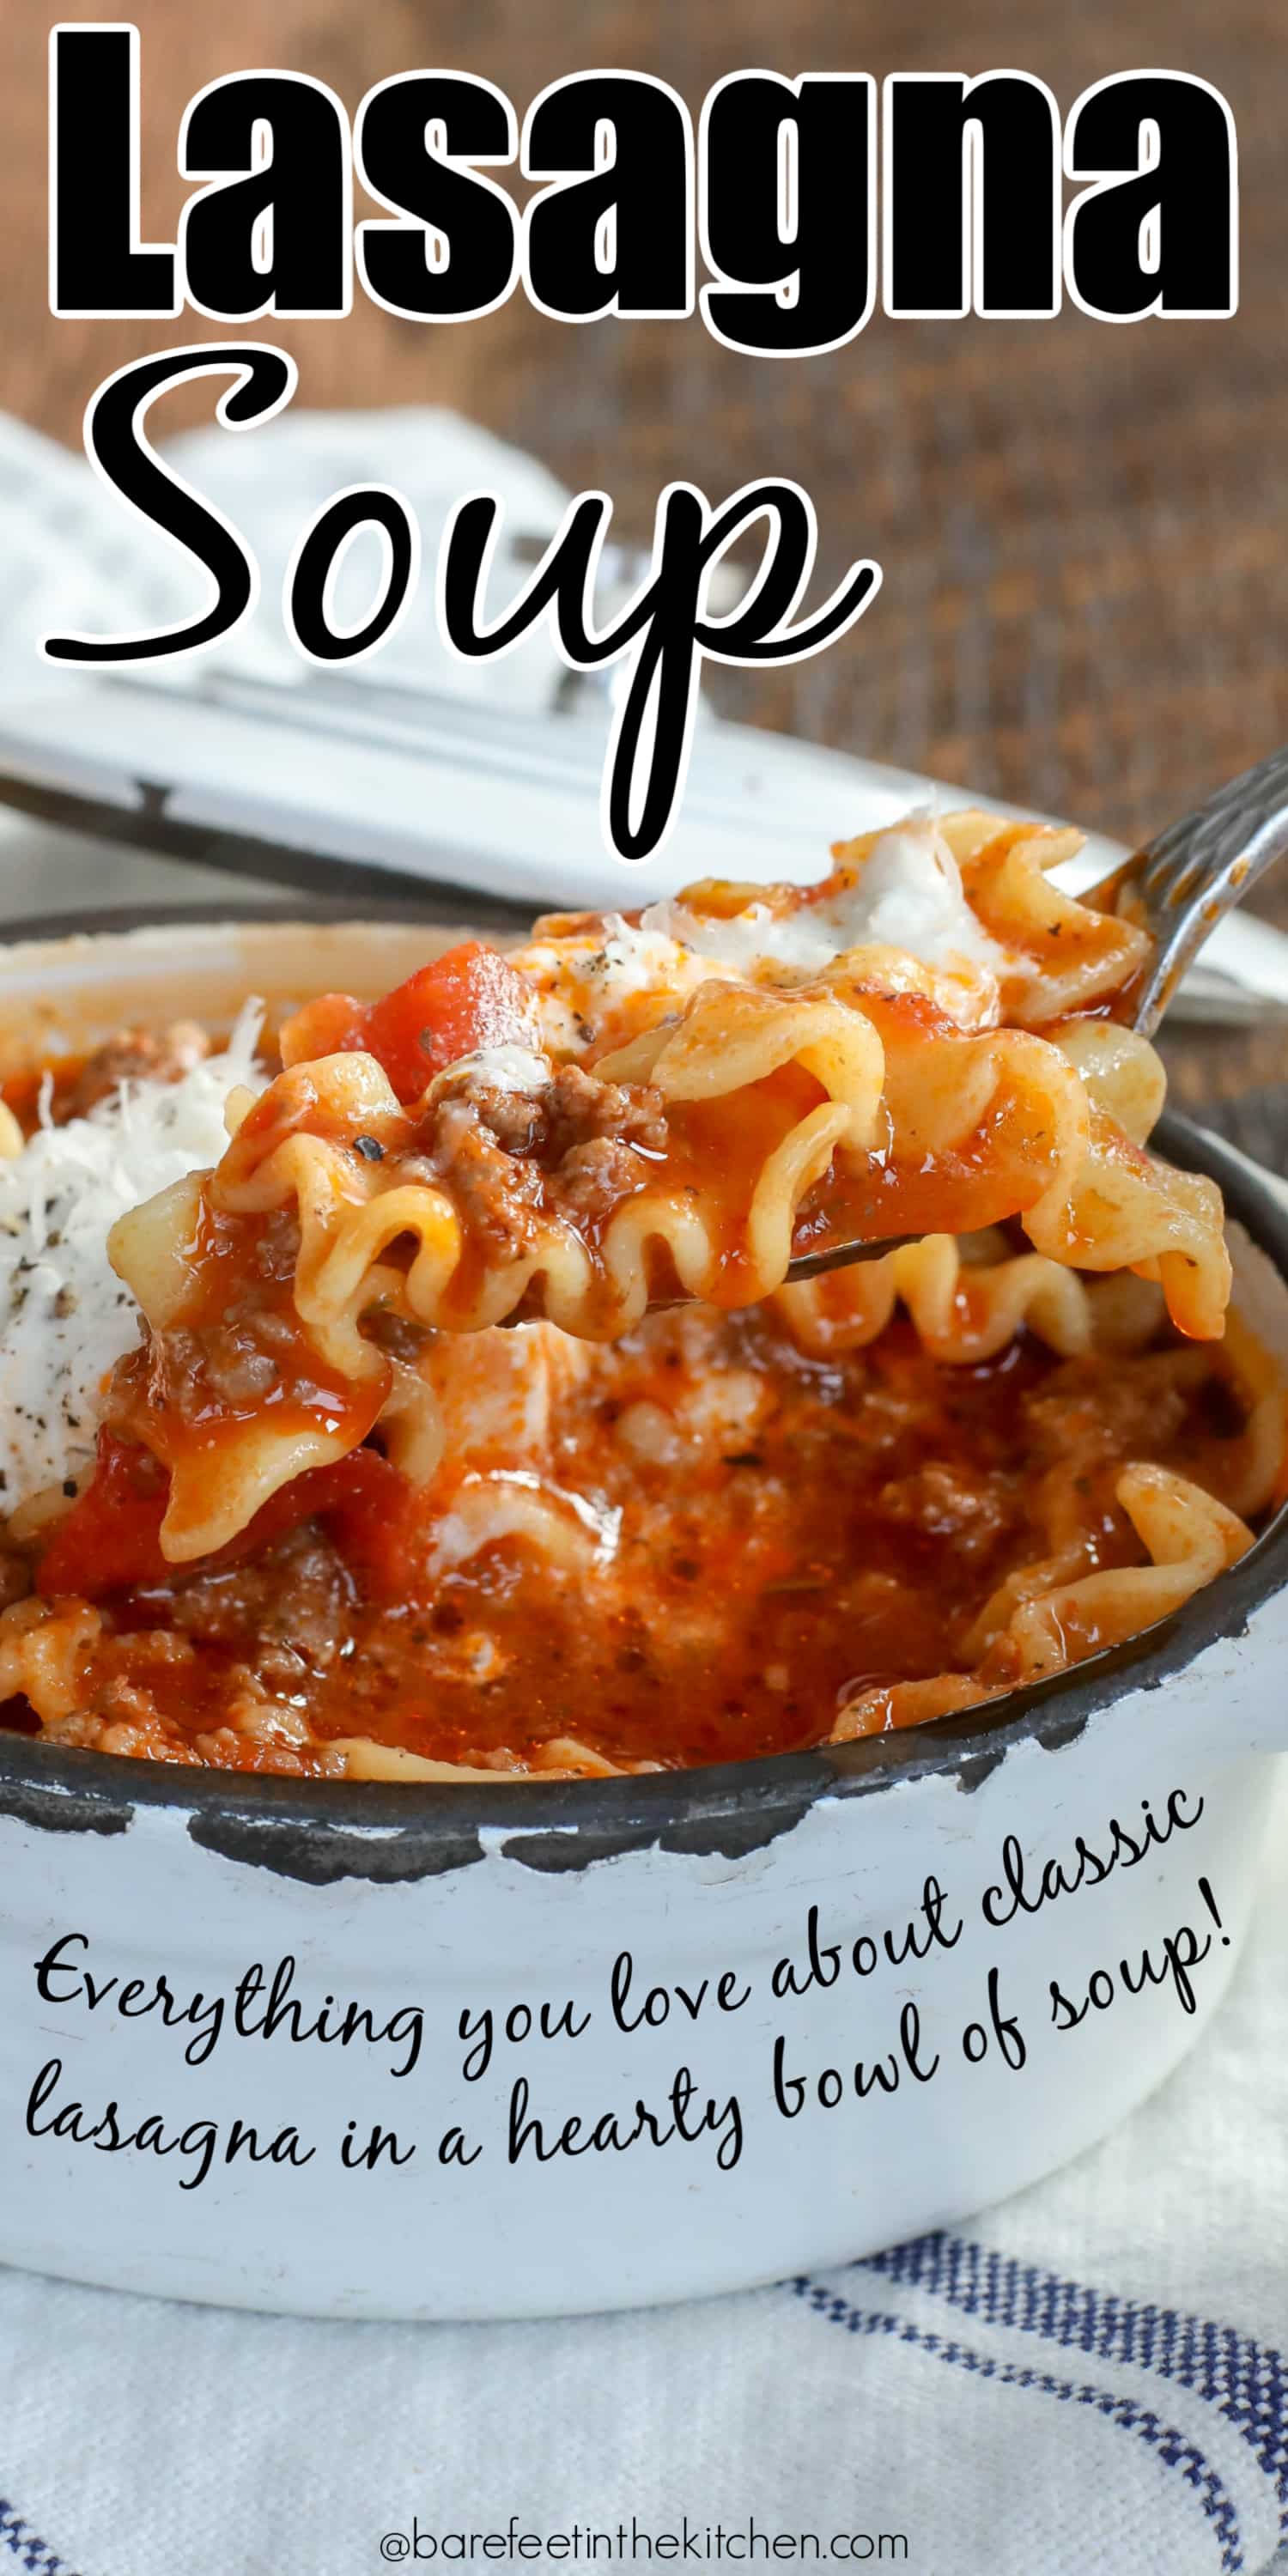 Lasagna Soup - everything you love about classic lasagna in a hearty bowl of soup!